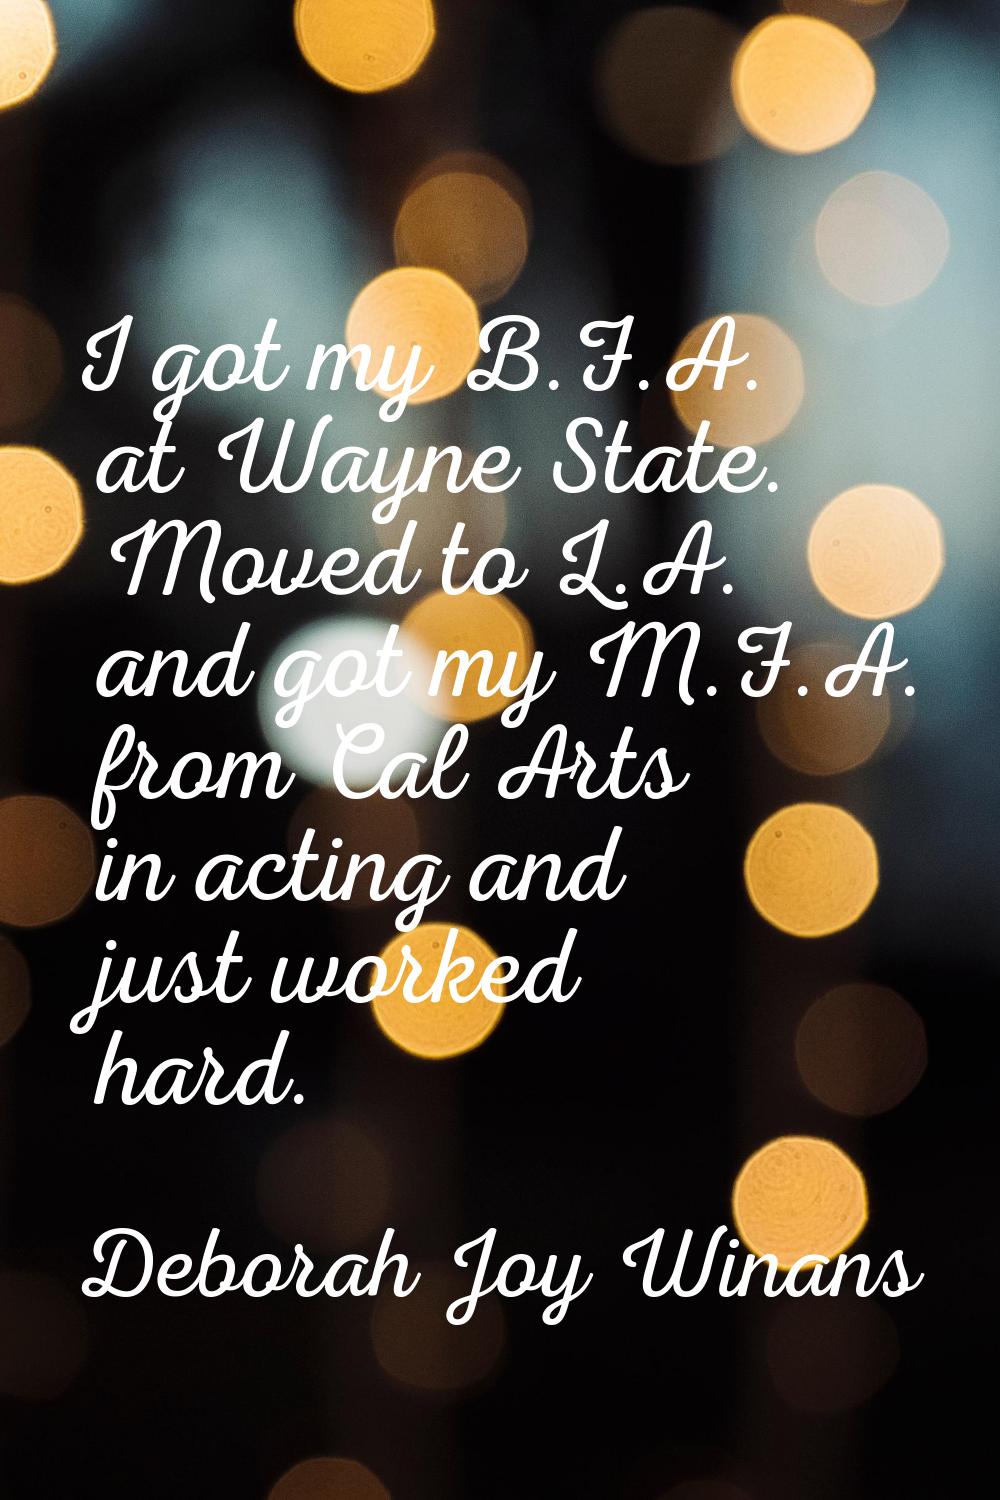 I got my B.F.A. at Wayne State. Moved to L.A. and got my M.F.A. from Cal Arts in acting and just wo